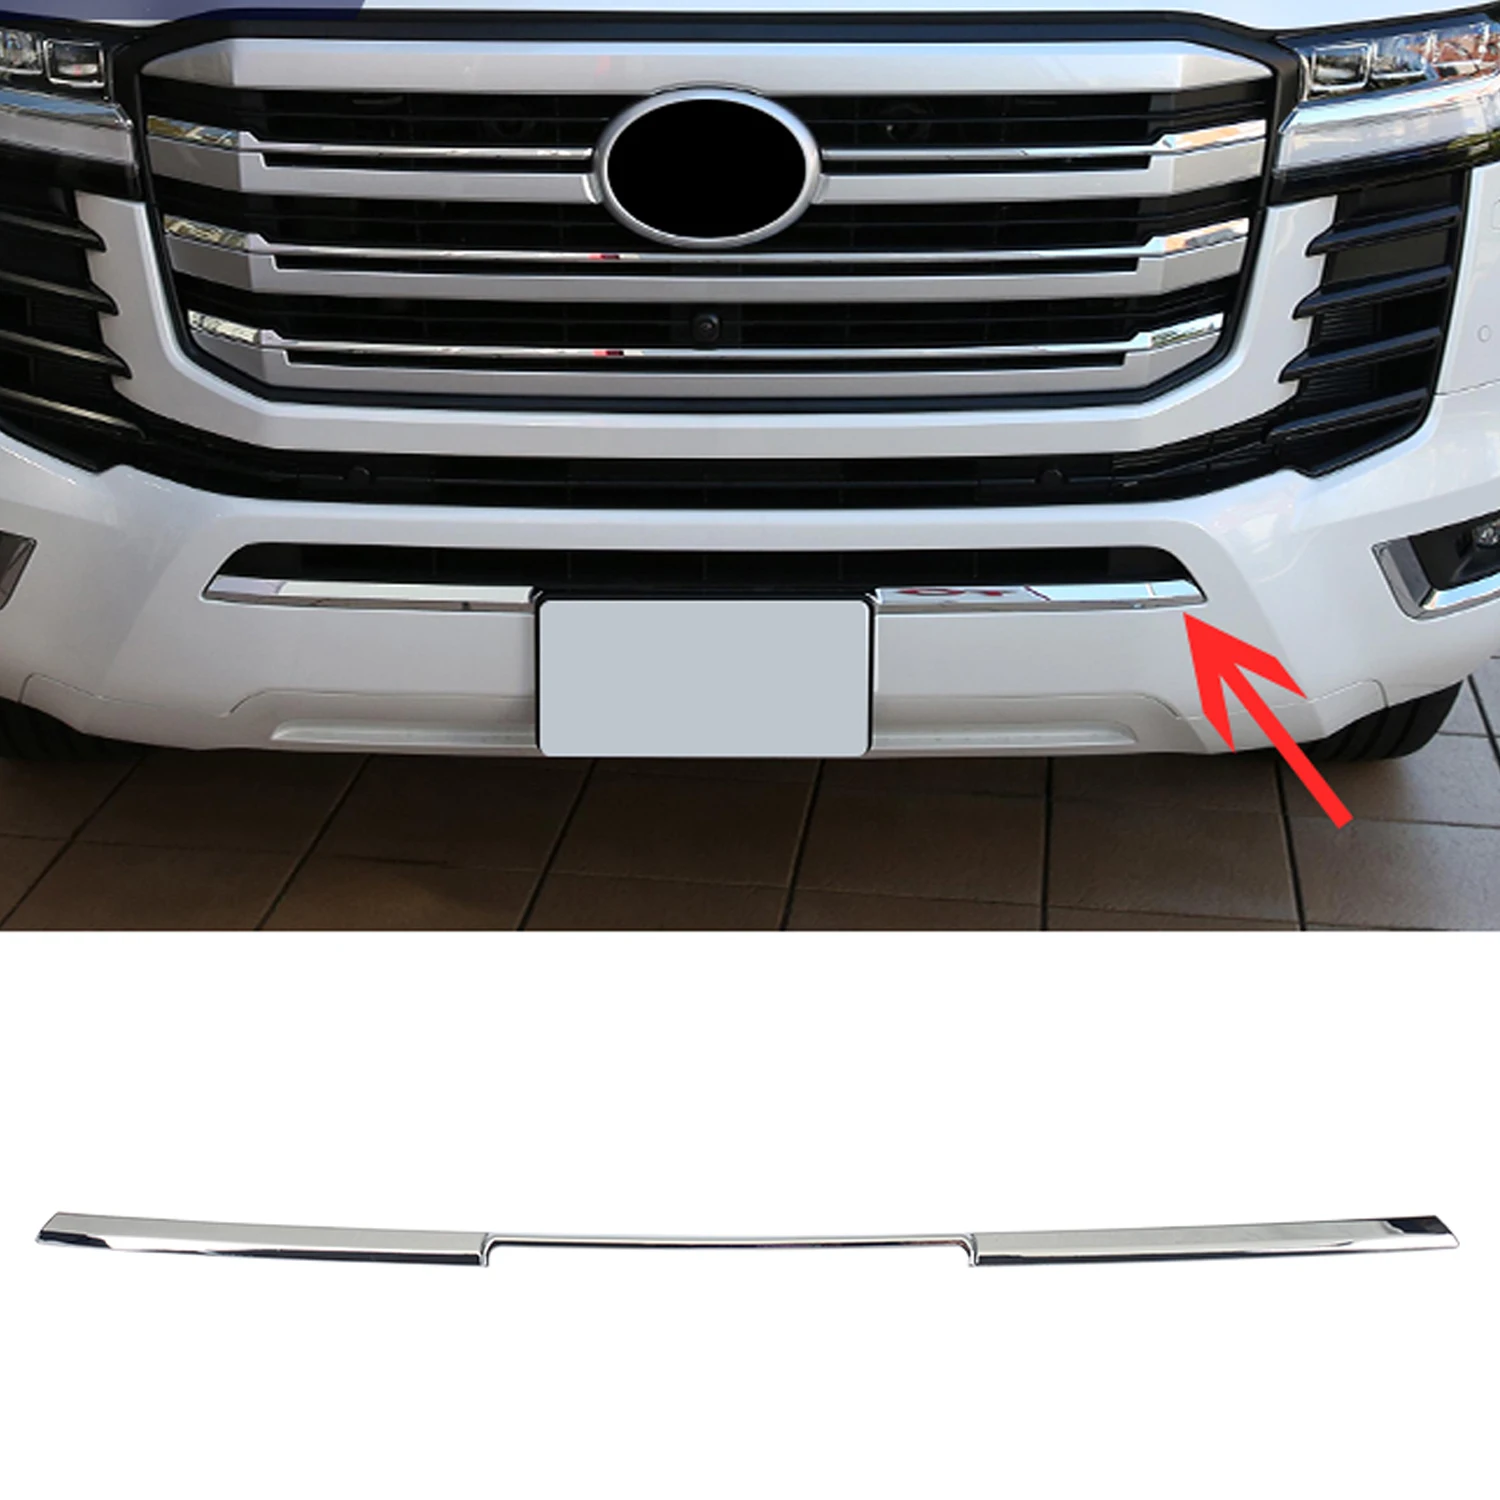 

for Toyota Land Cruiser J300 LC300 2022 2023 Car Accessories Center Grill Grille Bottom Molding Cover Trim ABS Chrome 1pc